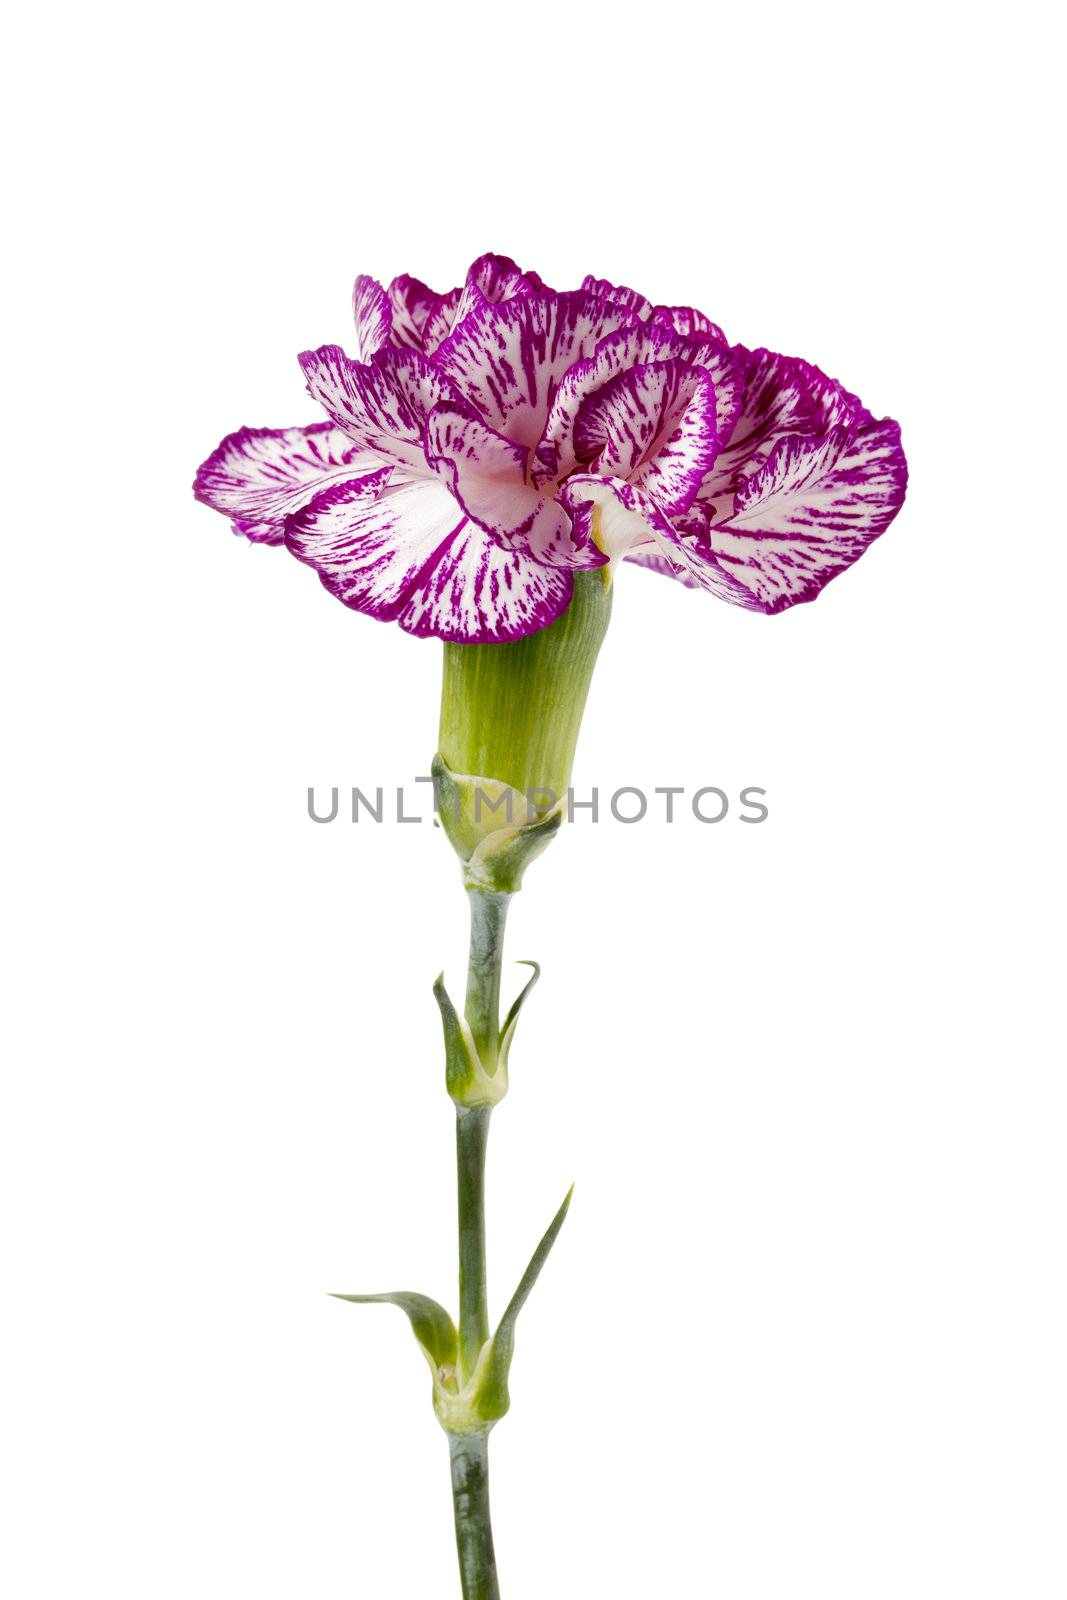 Close-up portrait of fresh bloom purple carnation standing on a white background